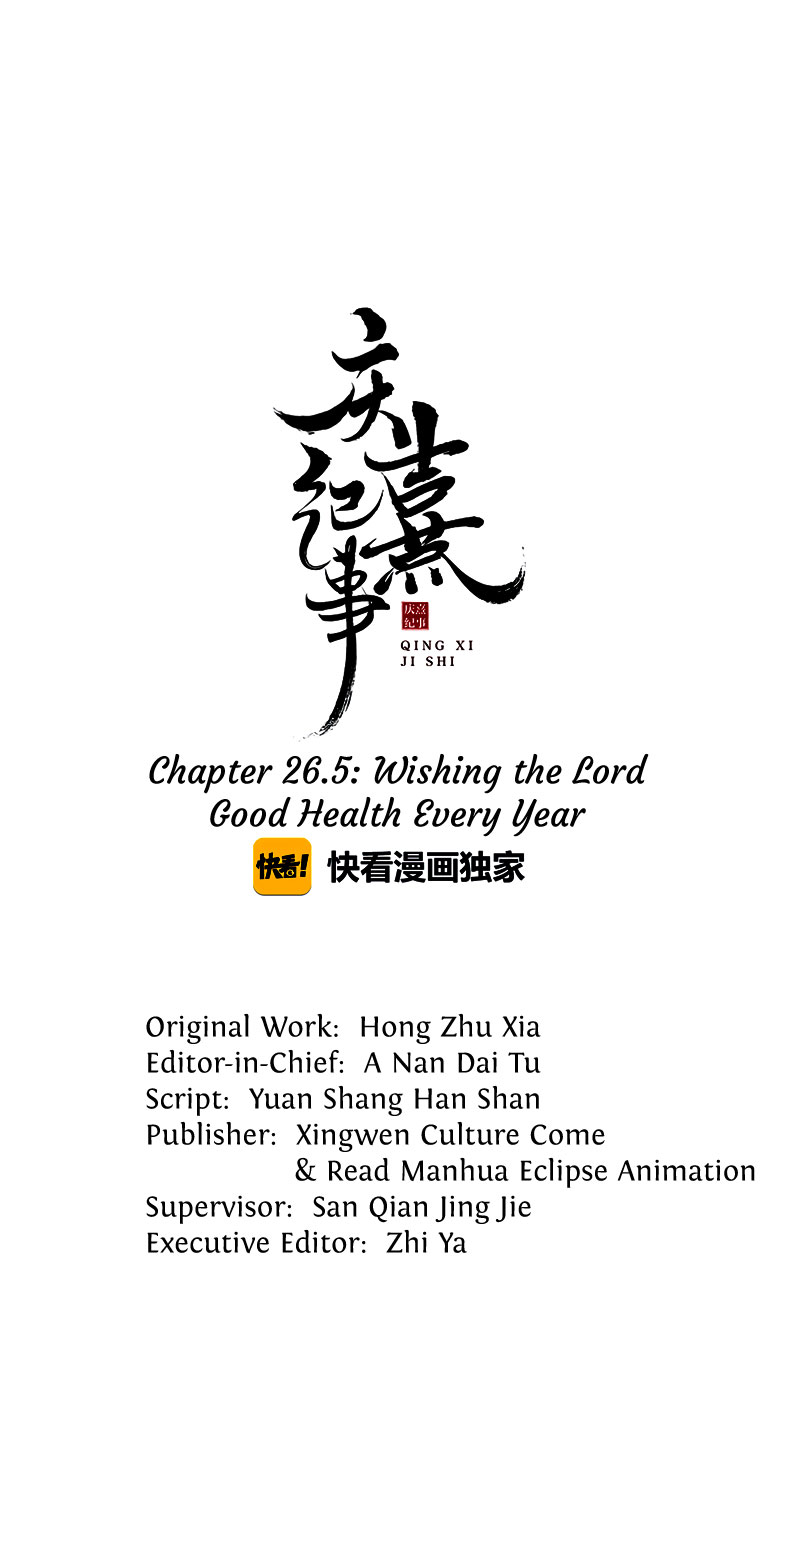 The Chronicles of Qing Xi 26.1